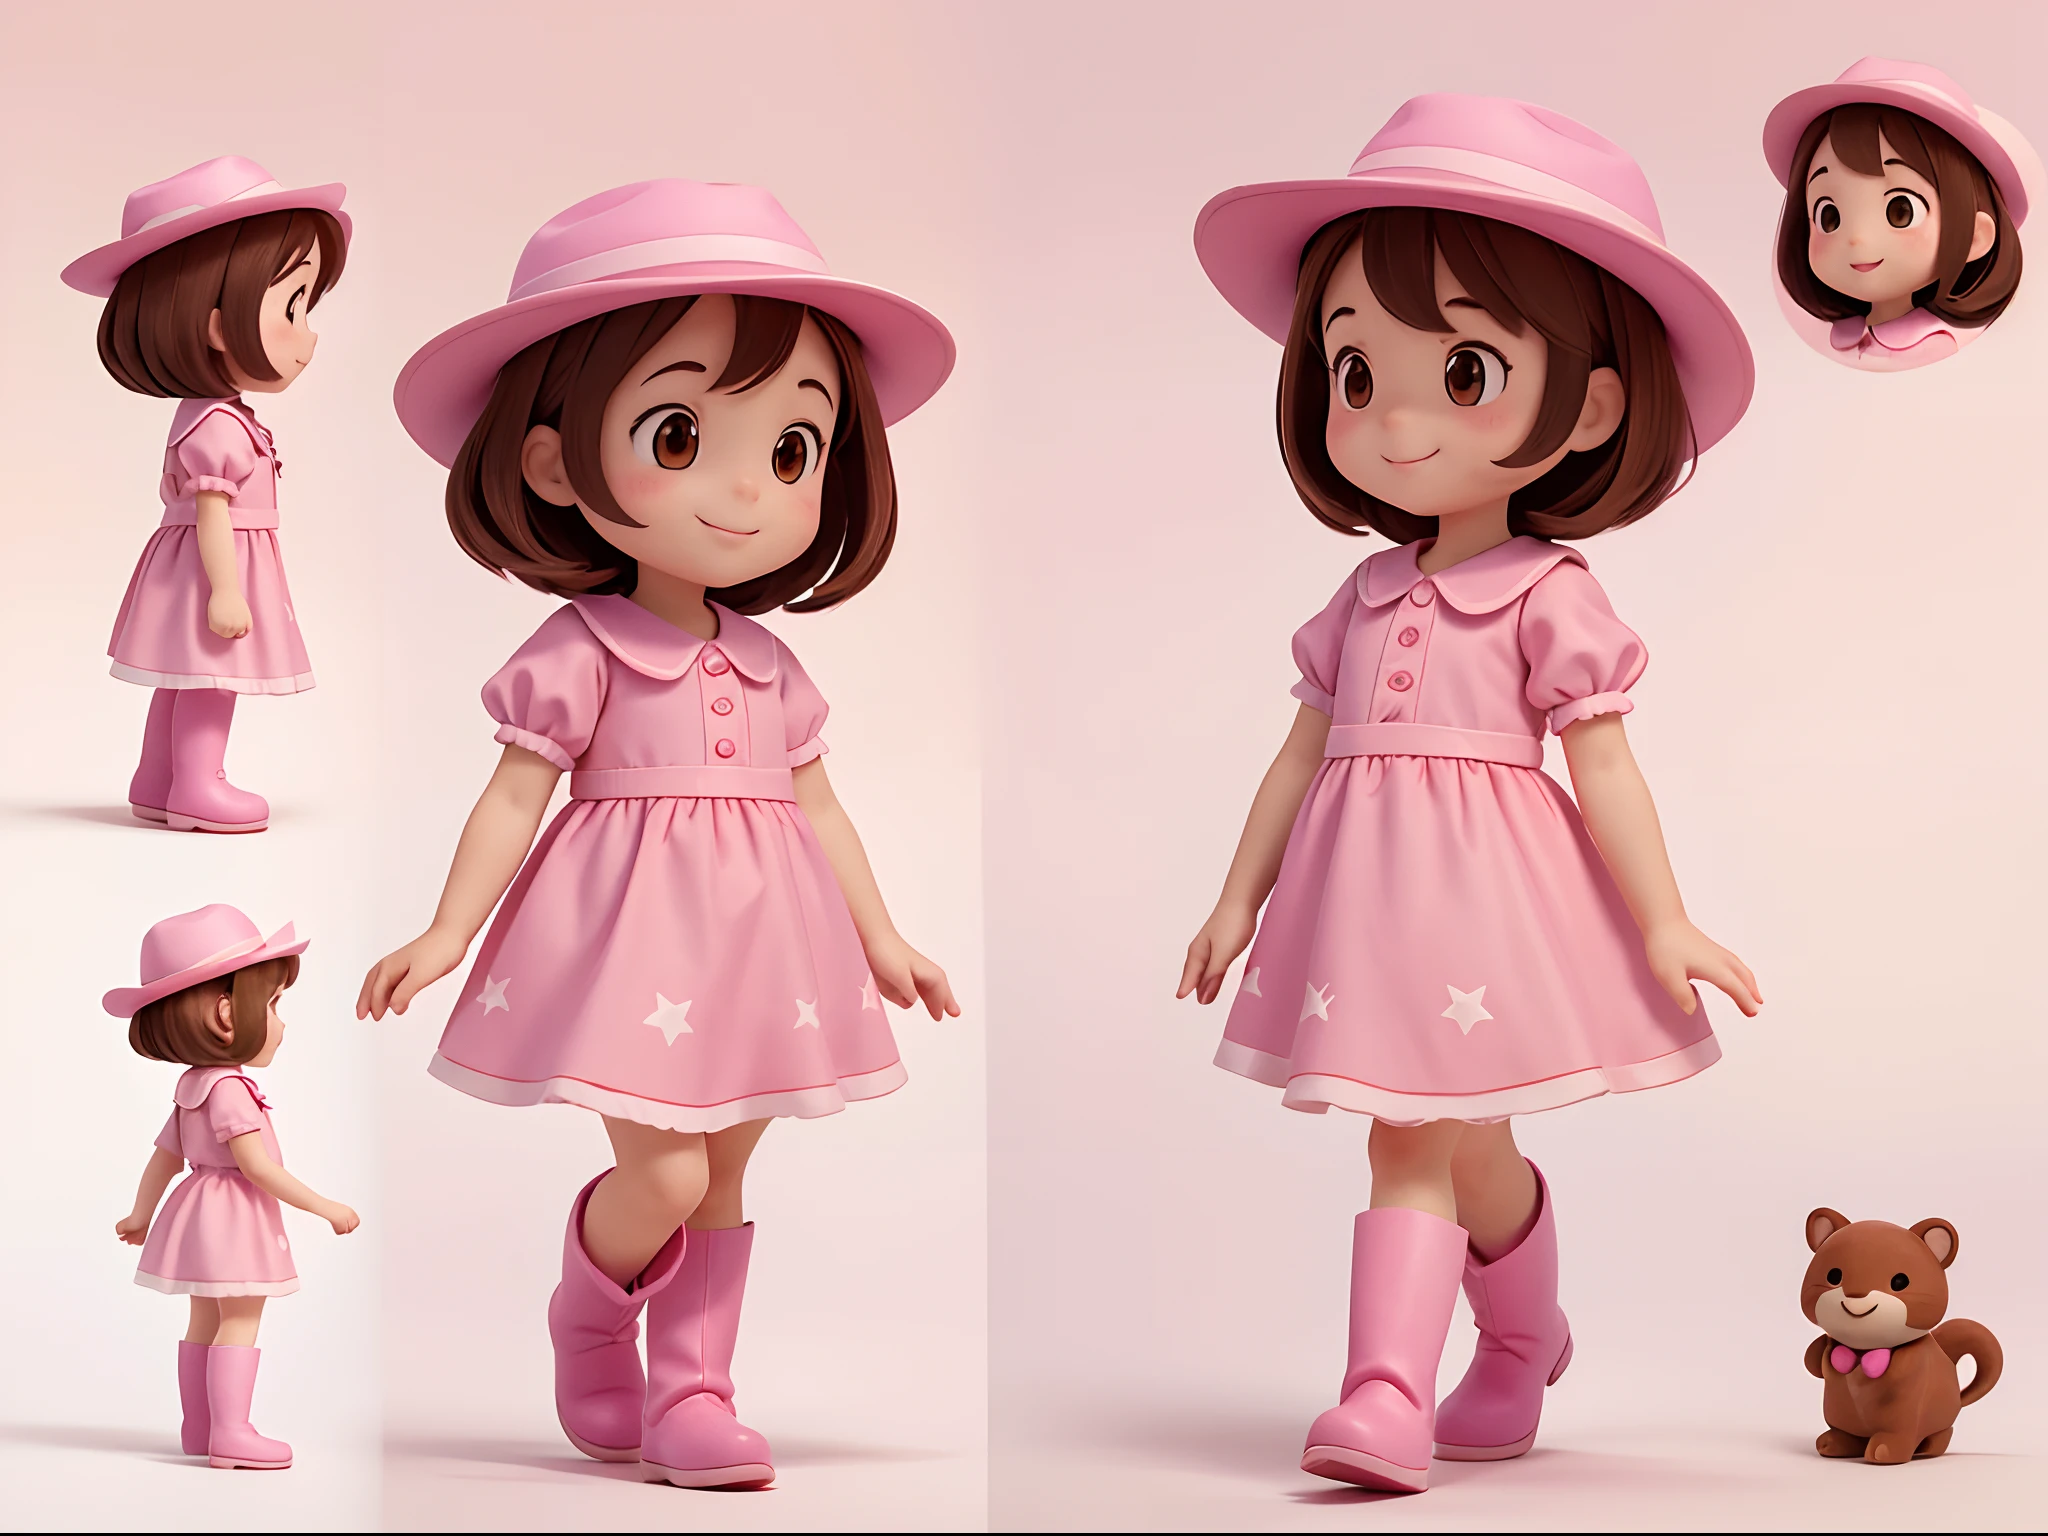 Profile picture of a  walking, character animation frames, identical character design in each frame, the girl is alone, happy, brown hair, brown eyes, rosy cheeks, pink cowboy outfit, pink hat, pink boots, vertical image, white background.